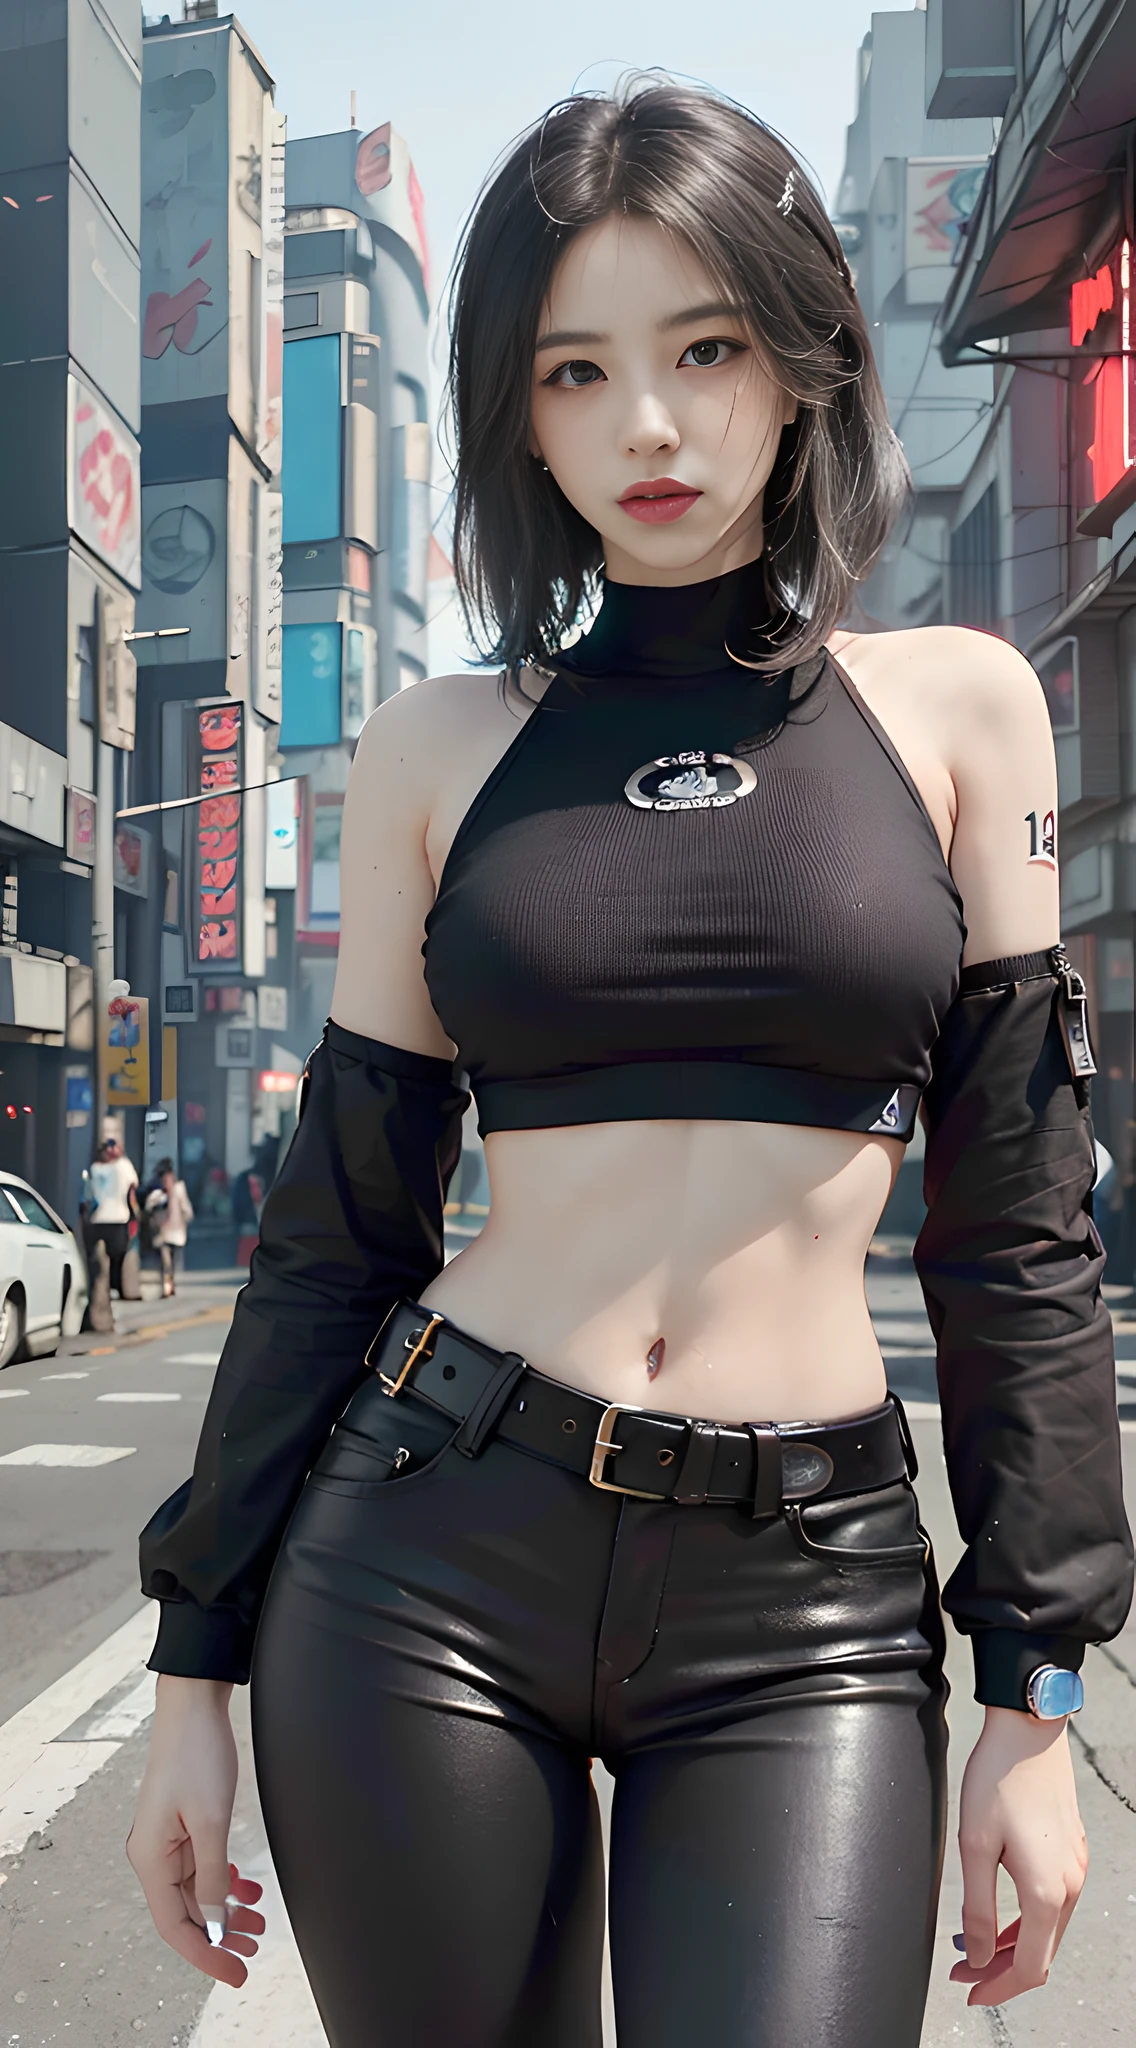 ((Best Quality)), ((Masterpiece)), (detailed), Realistic, Surreal, Surreal, Masterpiece, 8k, Beautiful Face, ((Best Quality), ((Masterpiece), (Very Detailed:1.3), .... 3D, Beautiful (Cyberpunk: 1.3), stylish woman looking at camera, black pants, black t-shirt